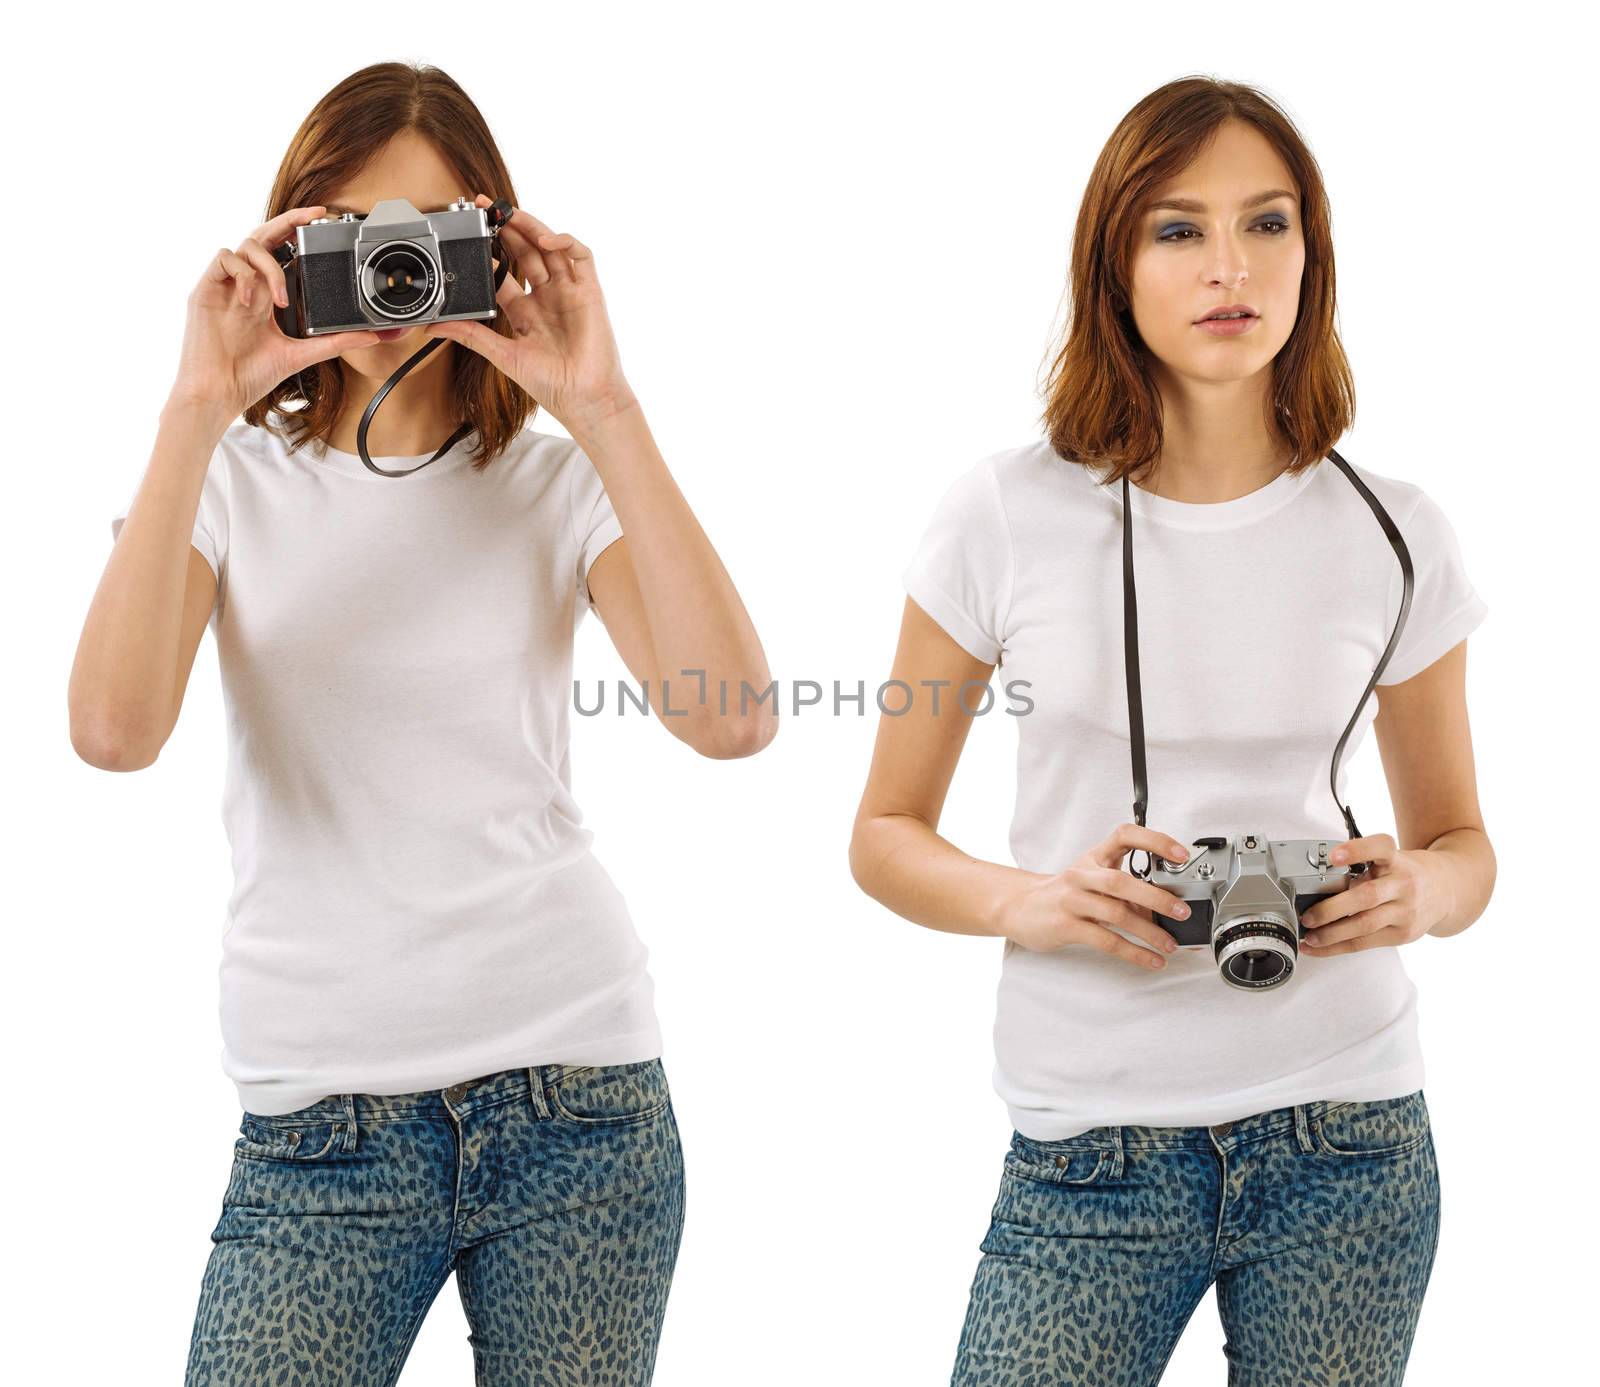 Photo of a young beautiful sexy woman with blank white shirt, holding a vintage camera. Ready for your design or artwork.
